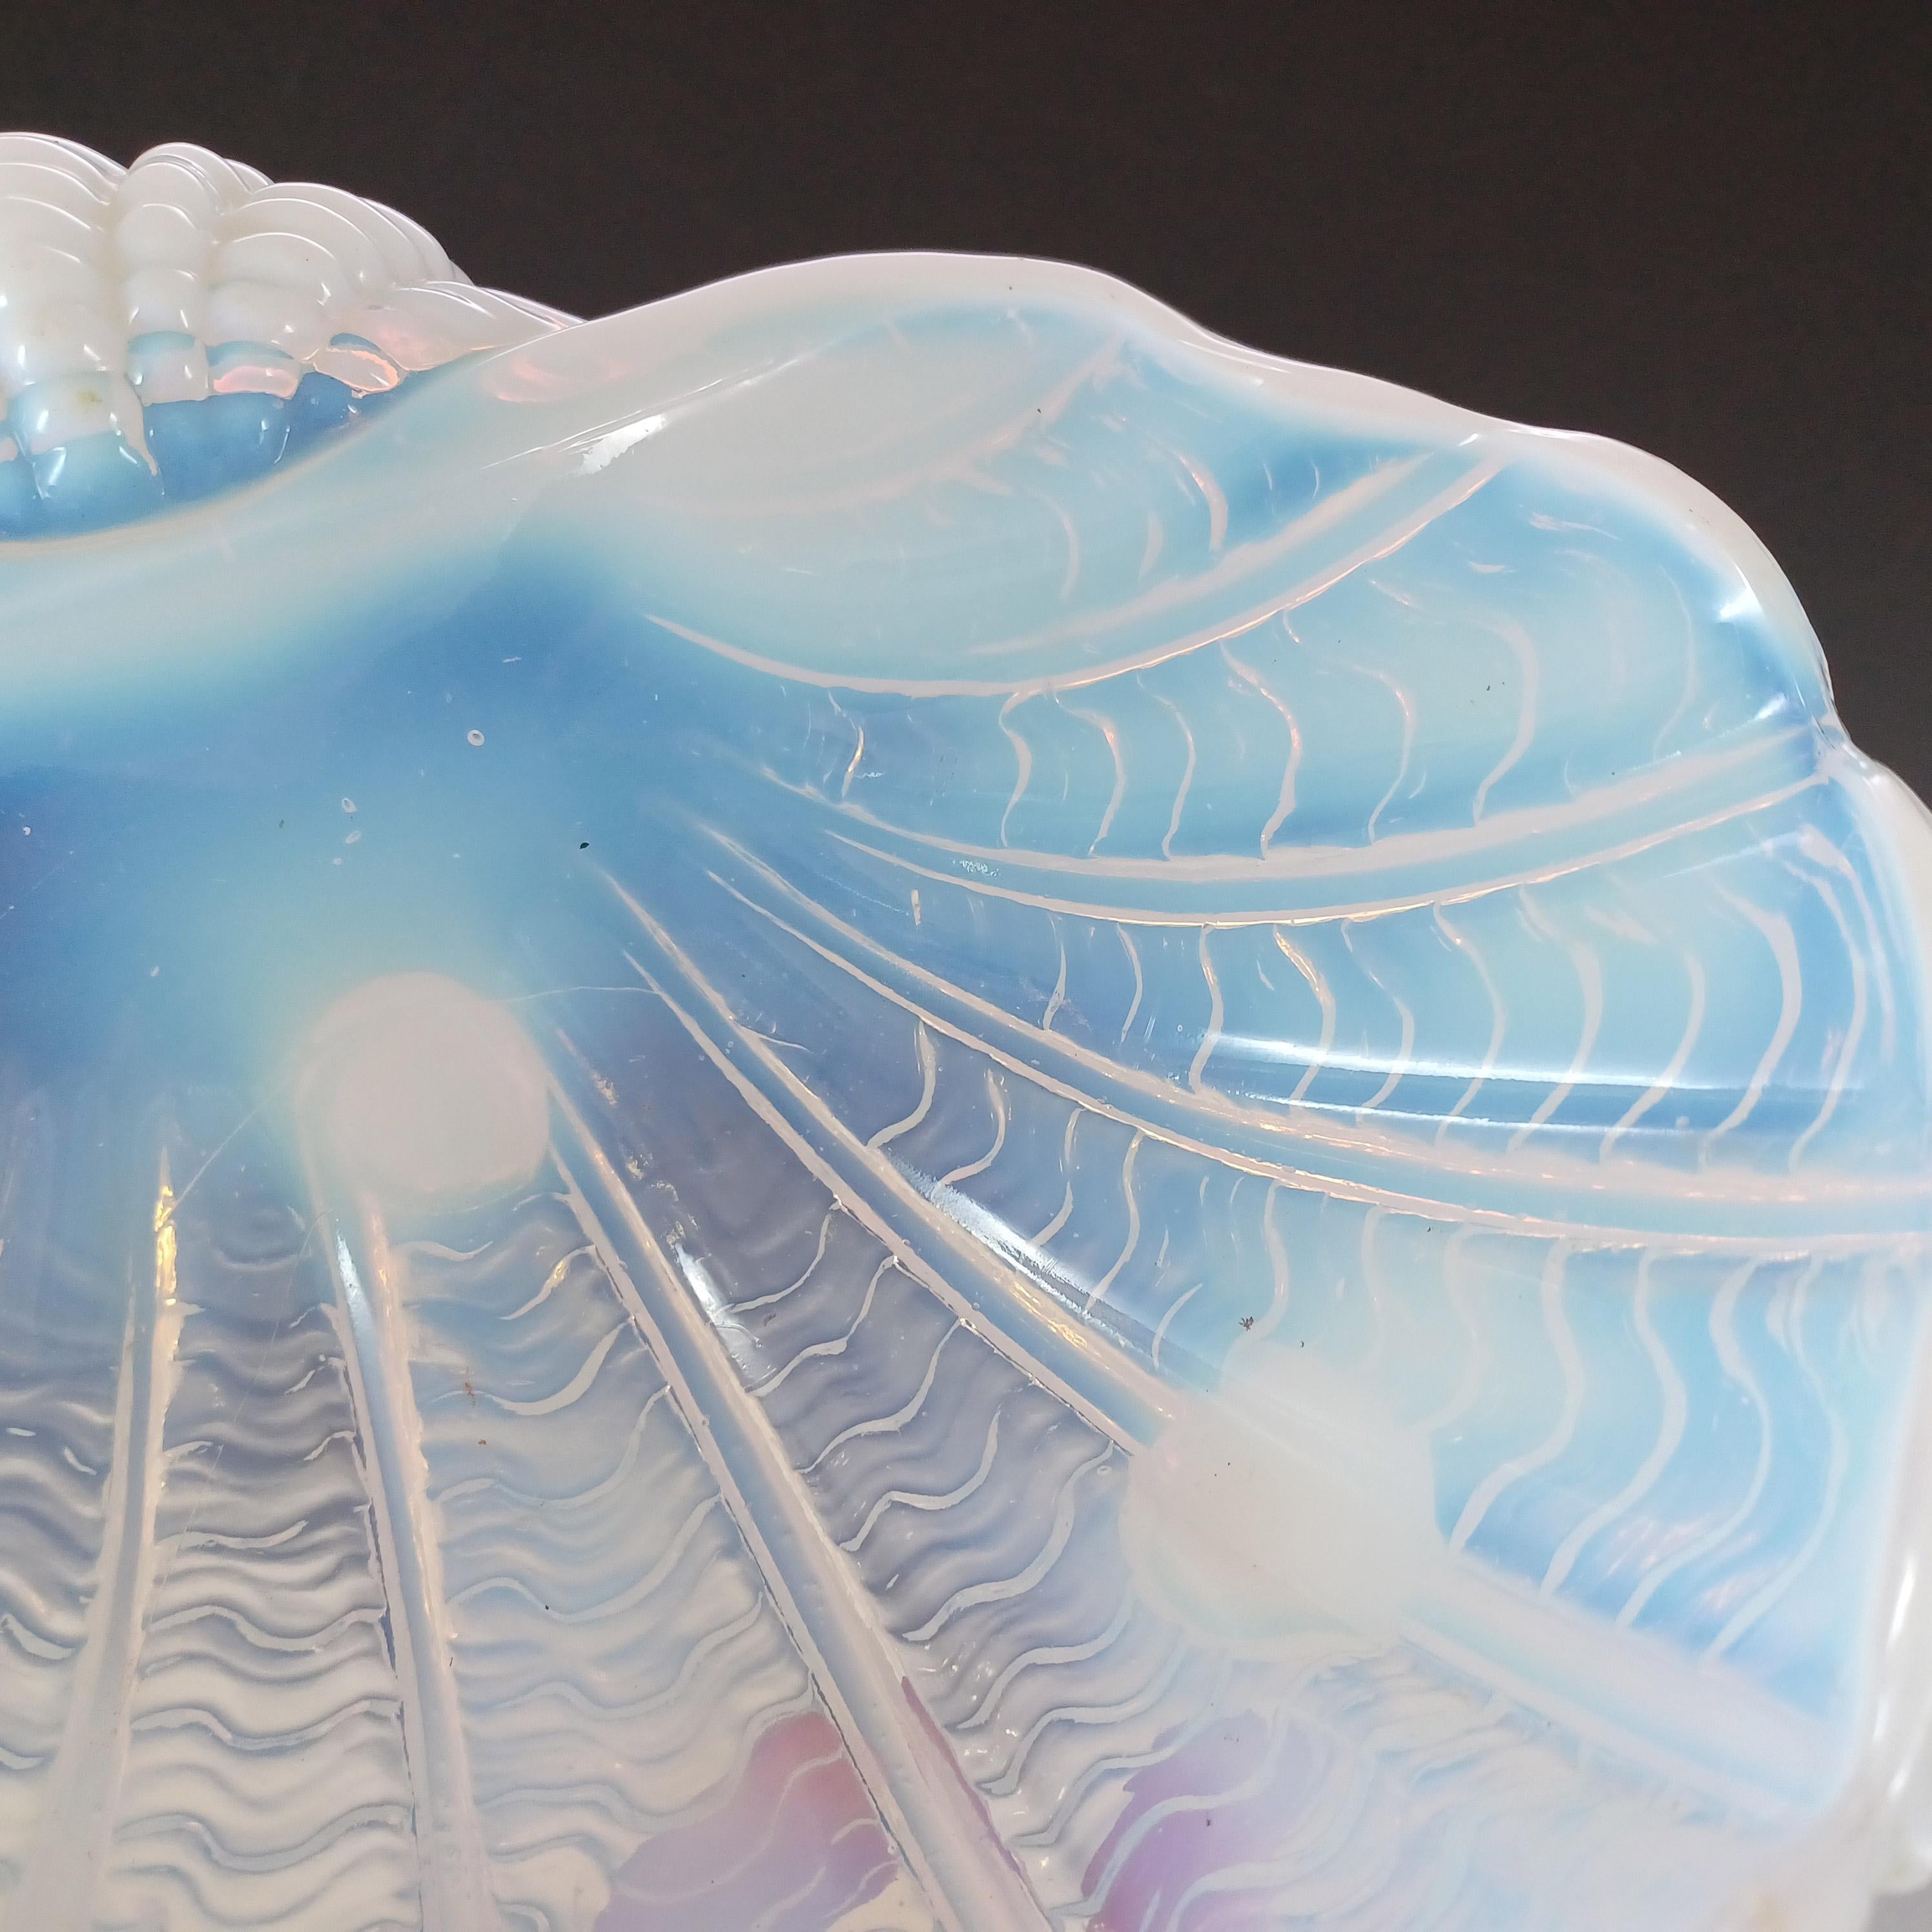 Pressed Art Deco 1930's Vintage Opalescent Glass Clam Shell Bowl For Sale